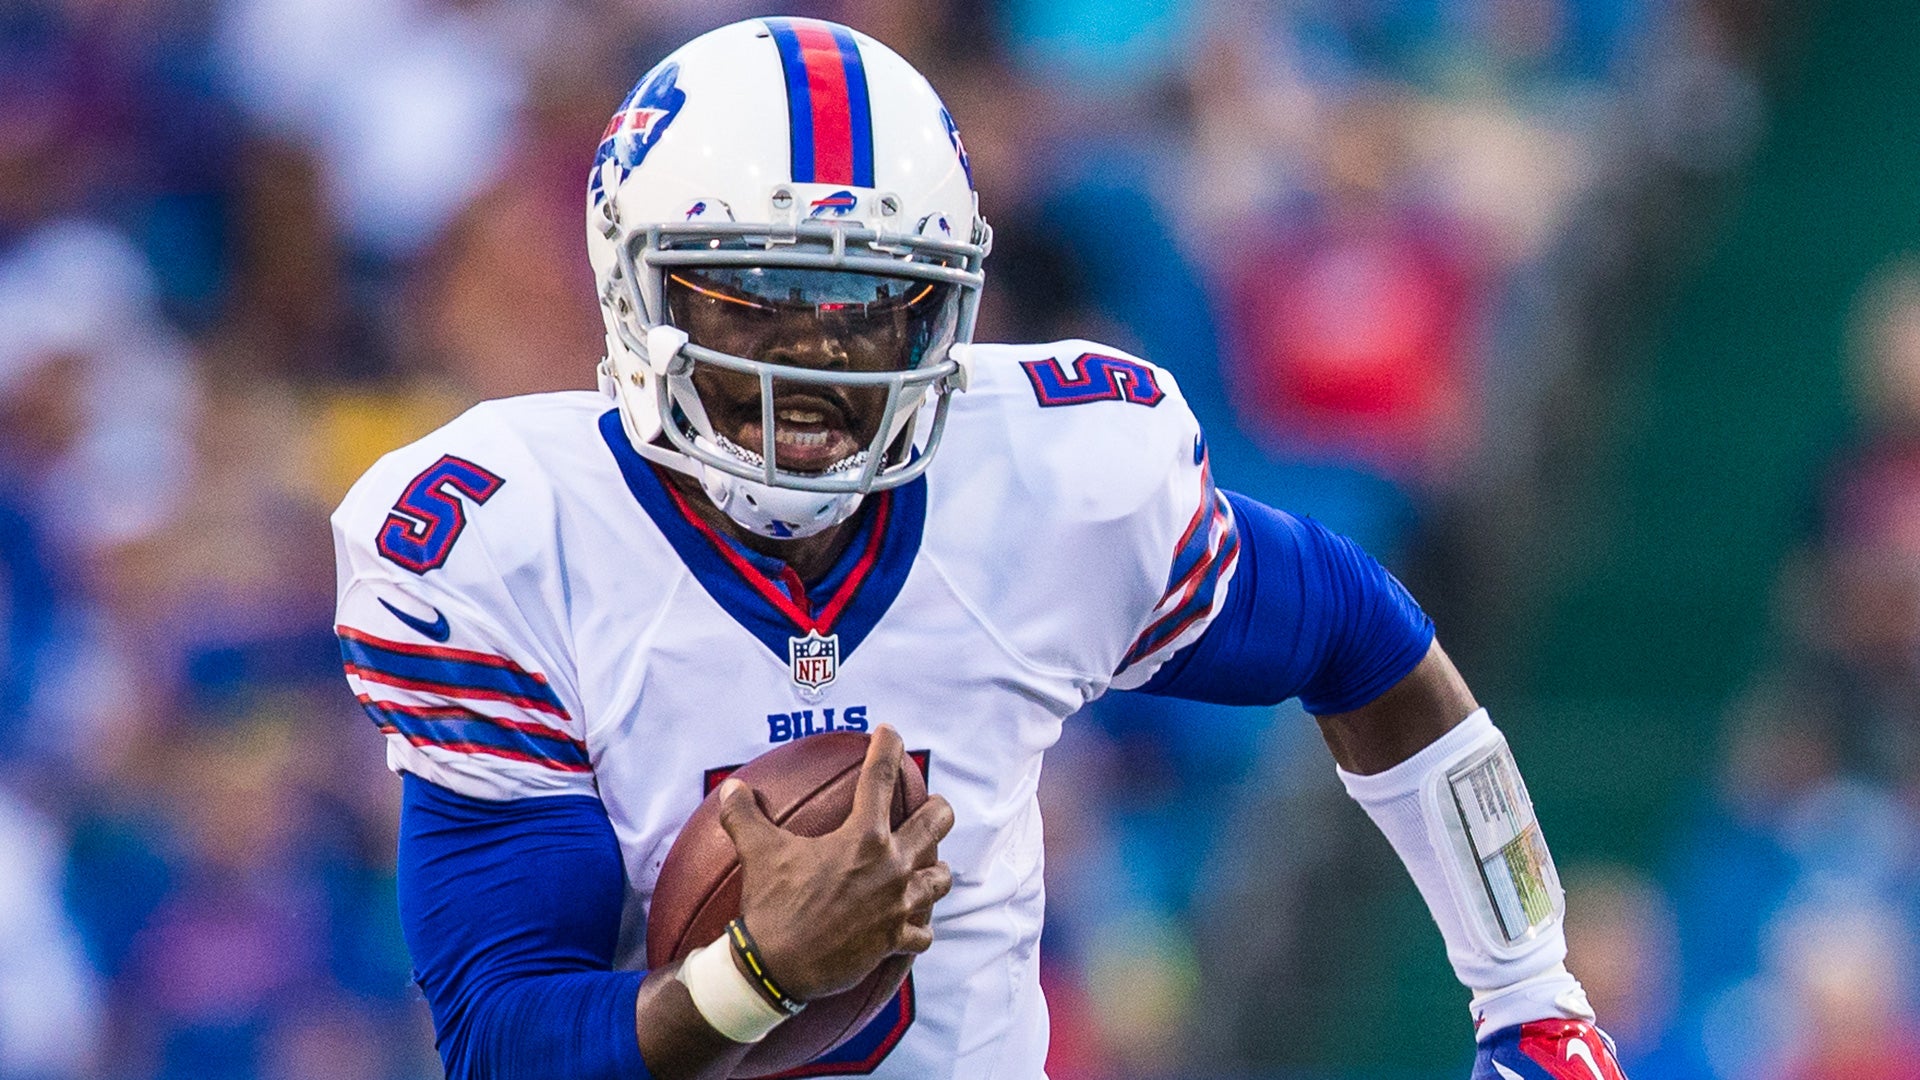 Tyrod Taylor is fine with T-Mobile or T2